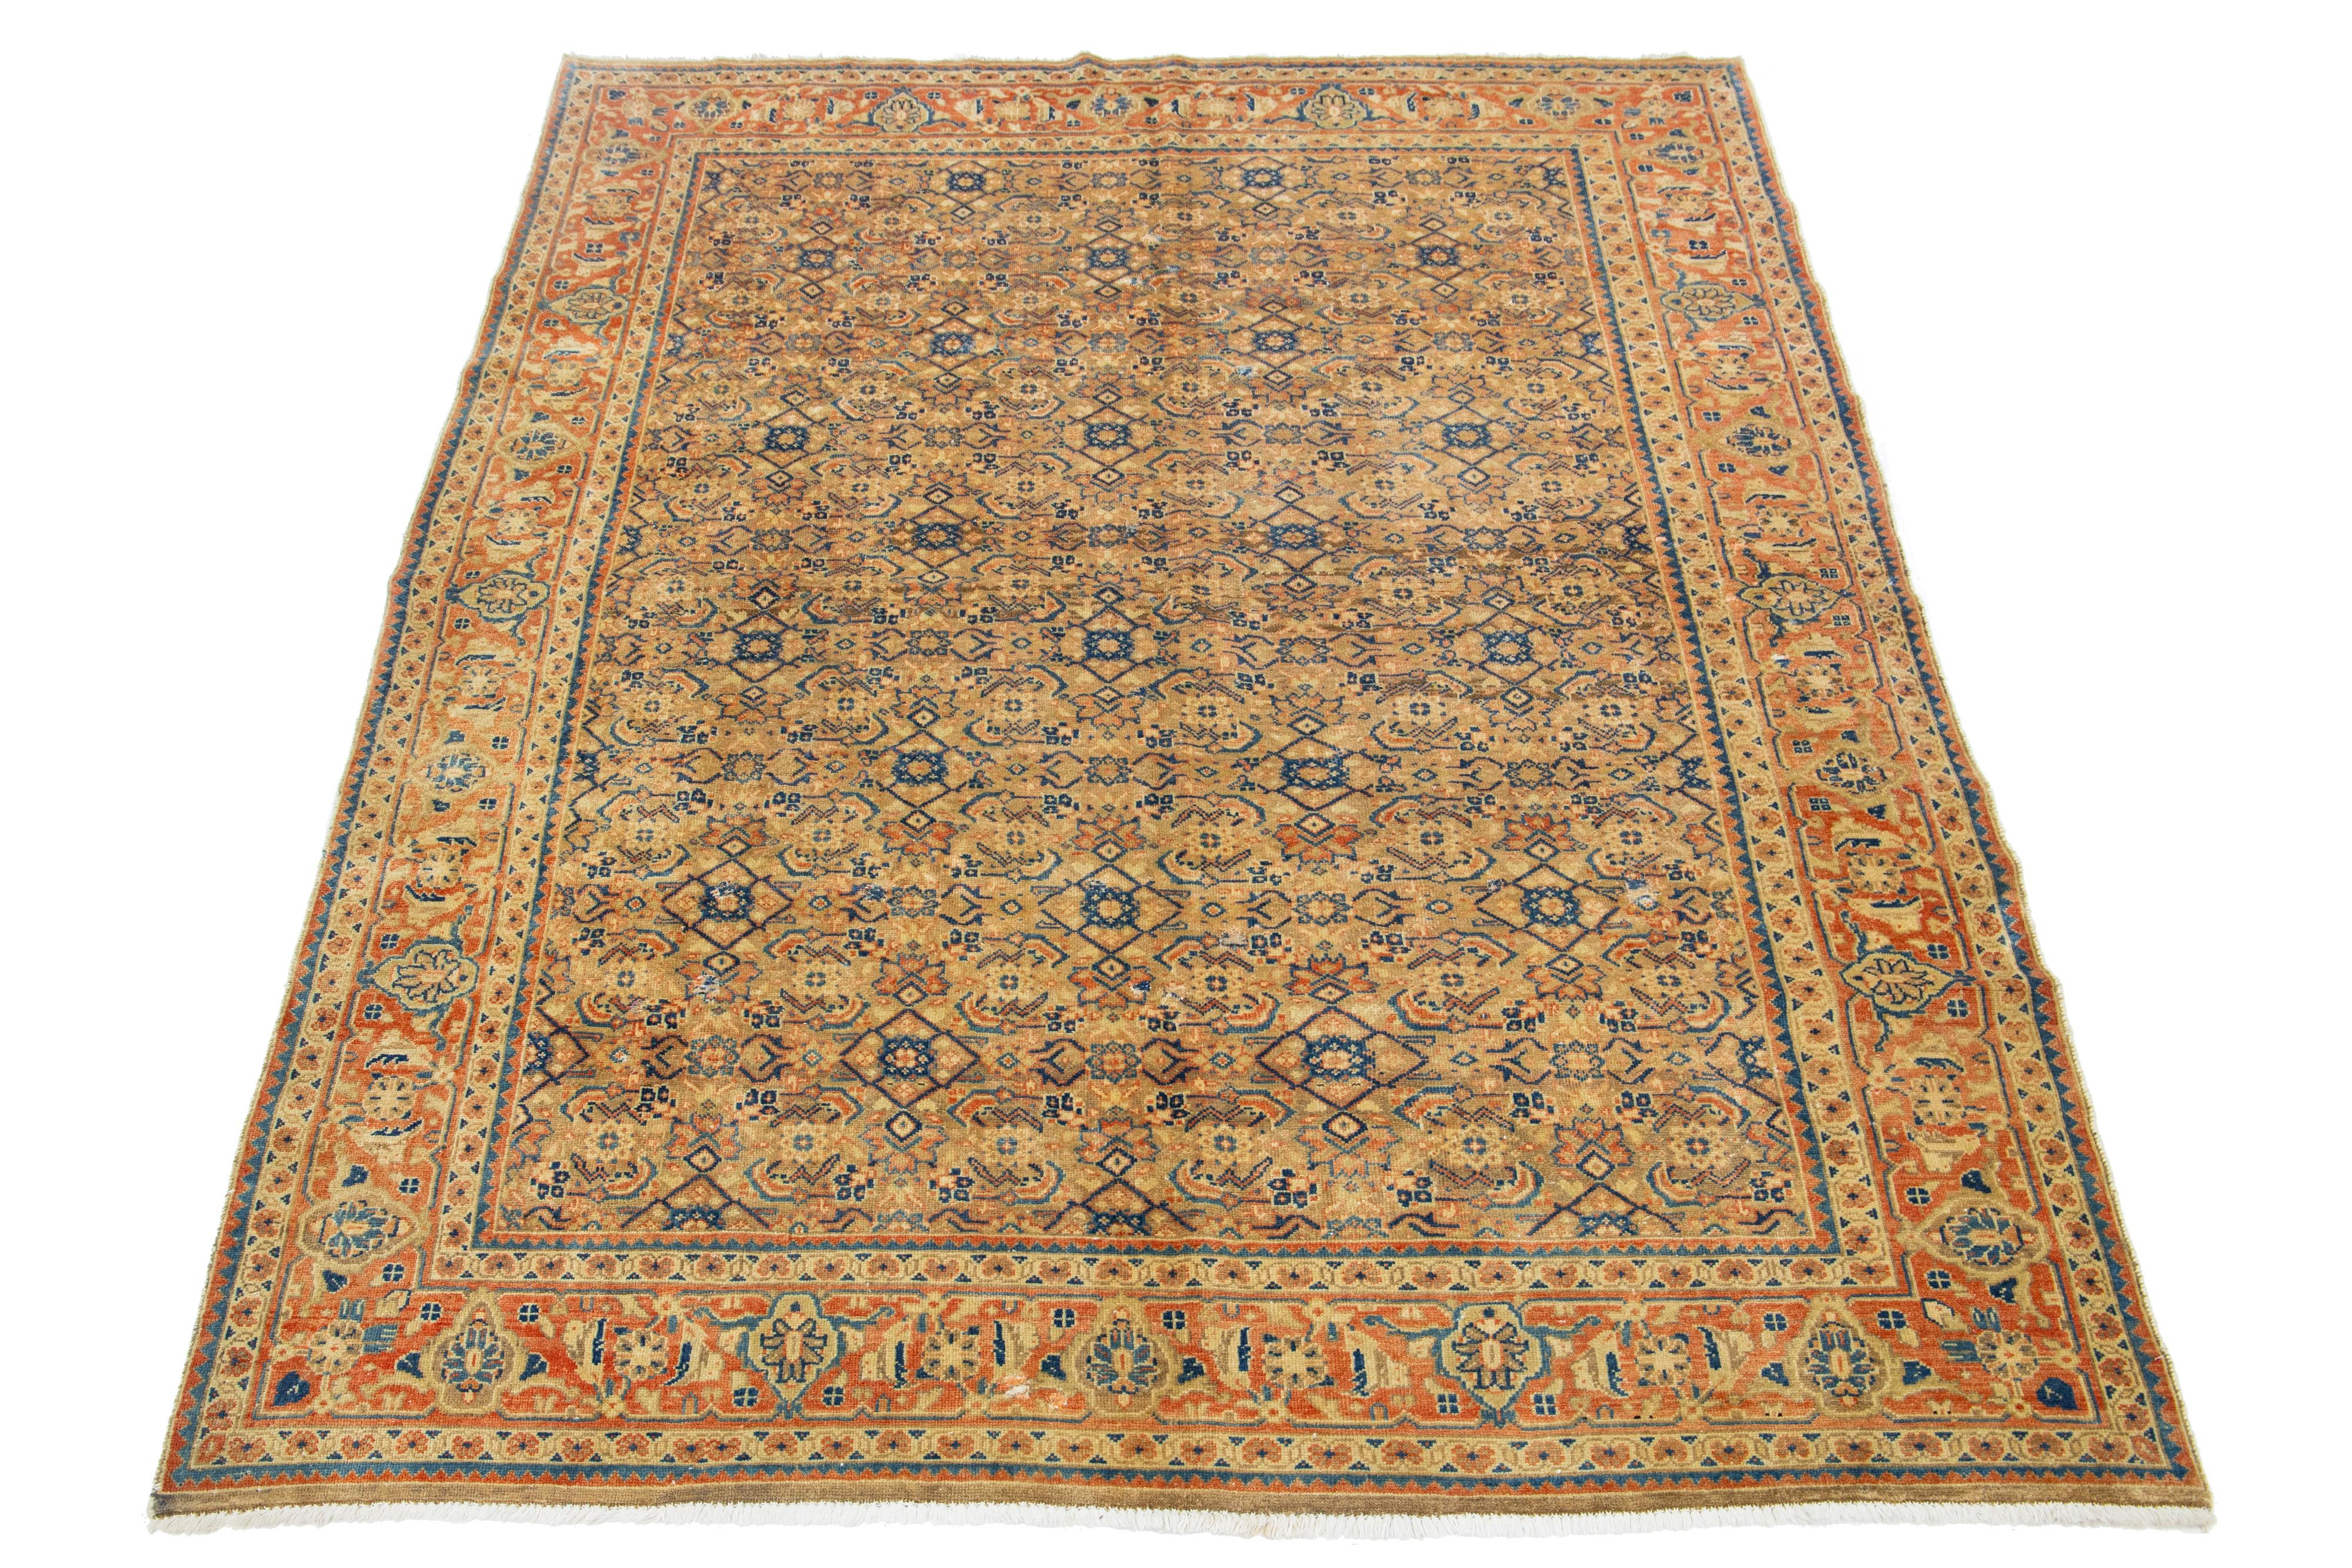 A Persian Mahal wool rug features a meticulously crafted, classic floral pattern. The design is enhanced by using contrasting colors, such as brown, rust, and blue, within the field.

This rug measures 7' X 10'5